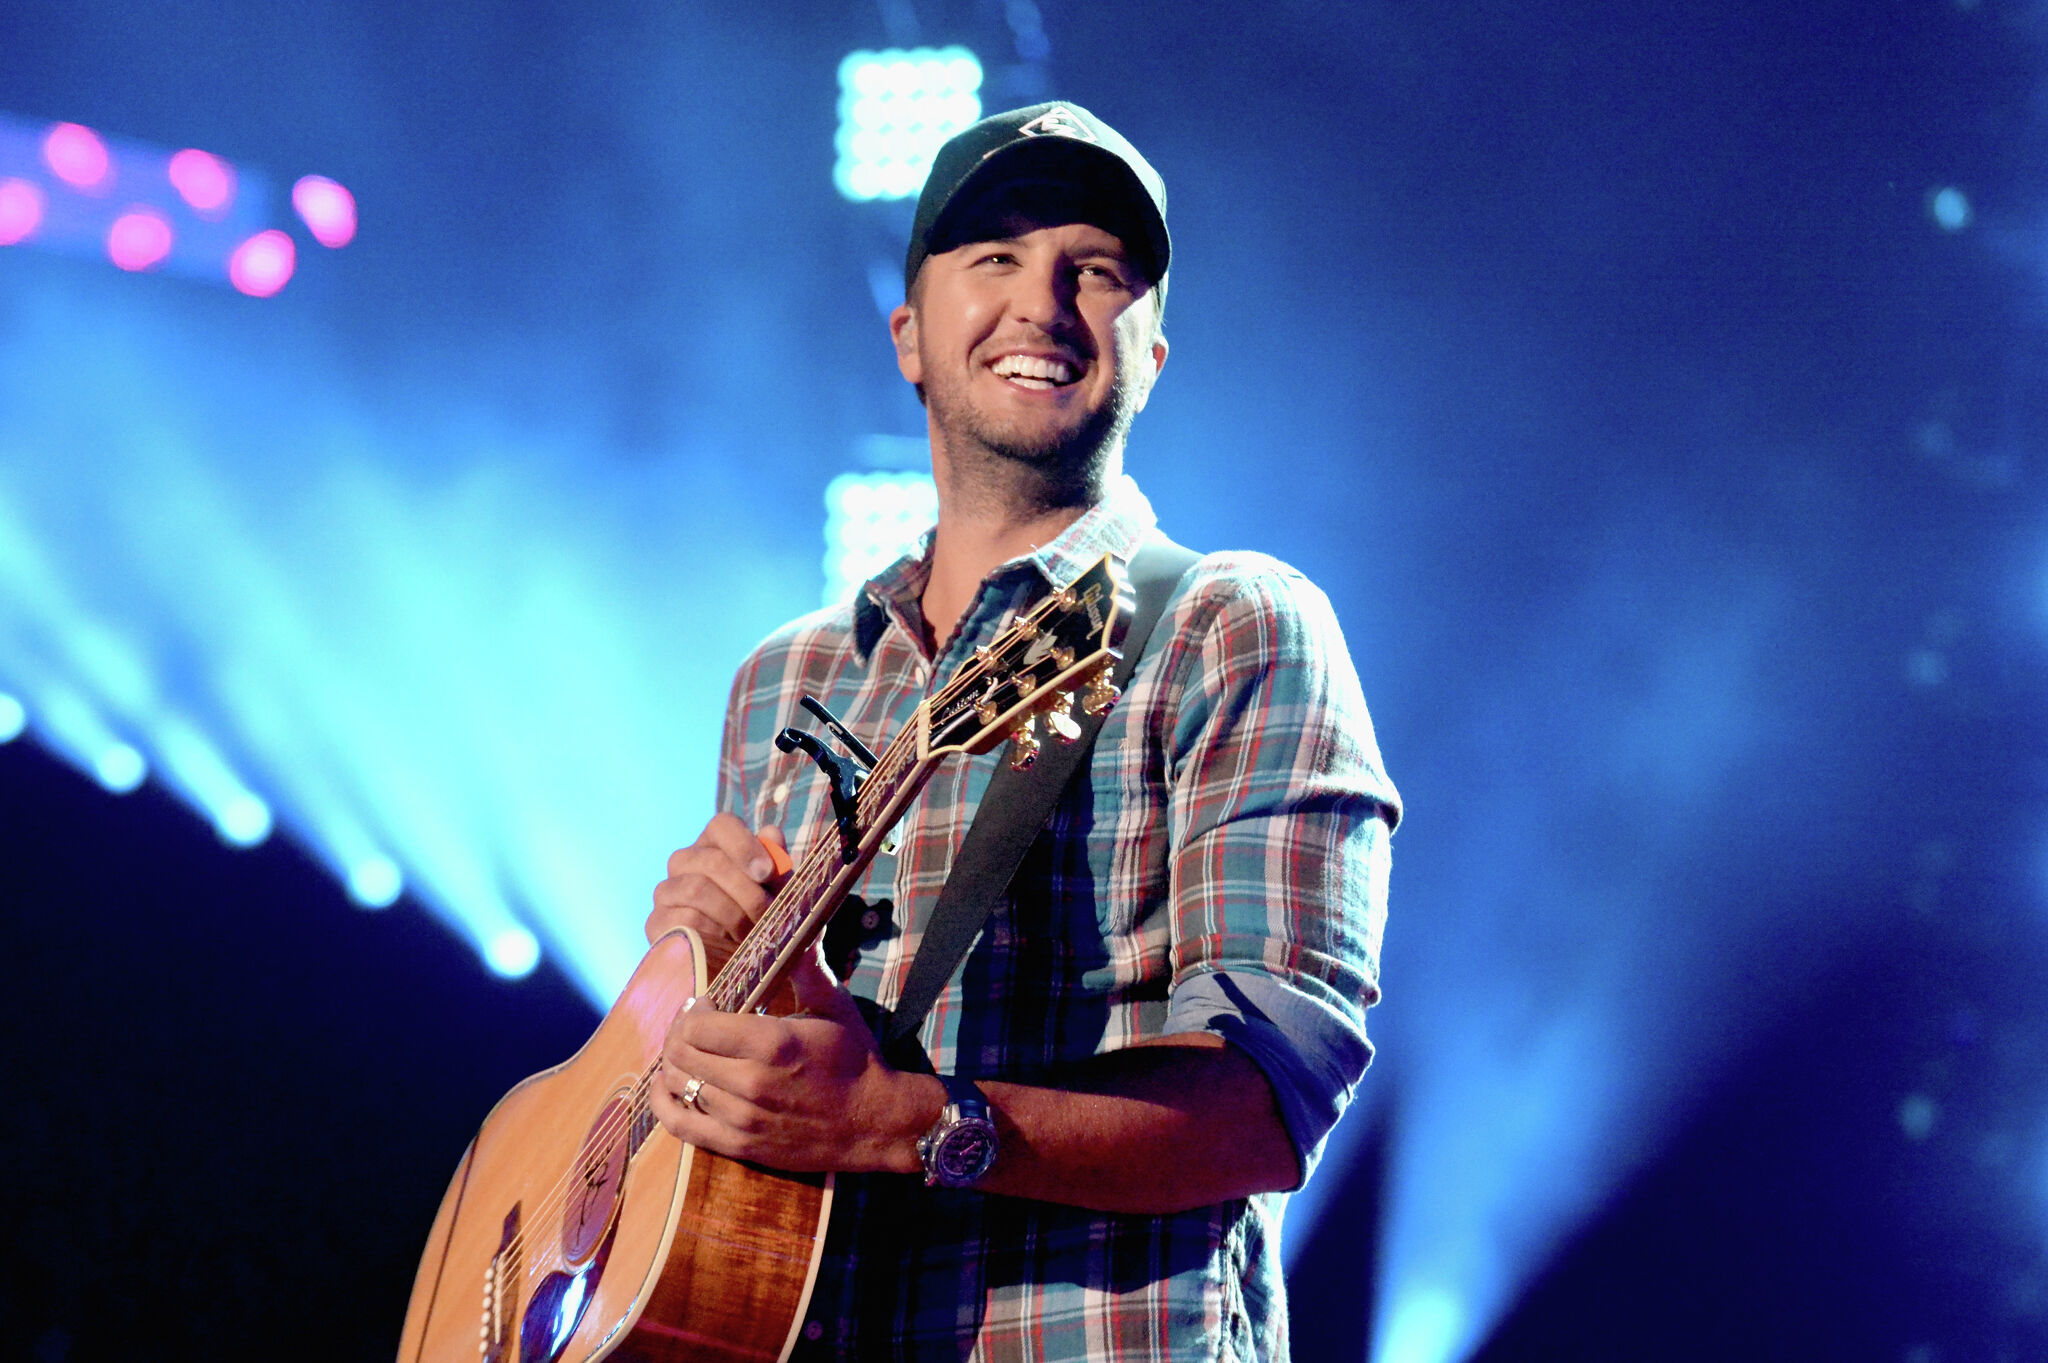 Luke Bryan sings 'Drink a Beer' with two fans at Hartford concert